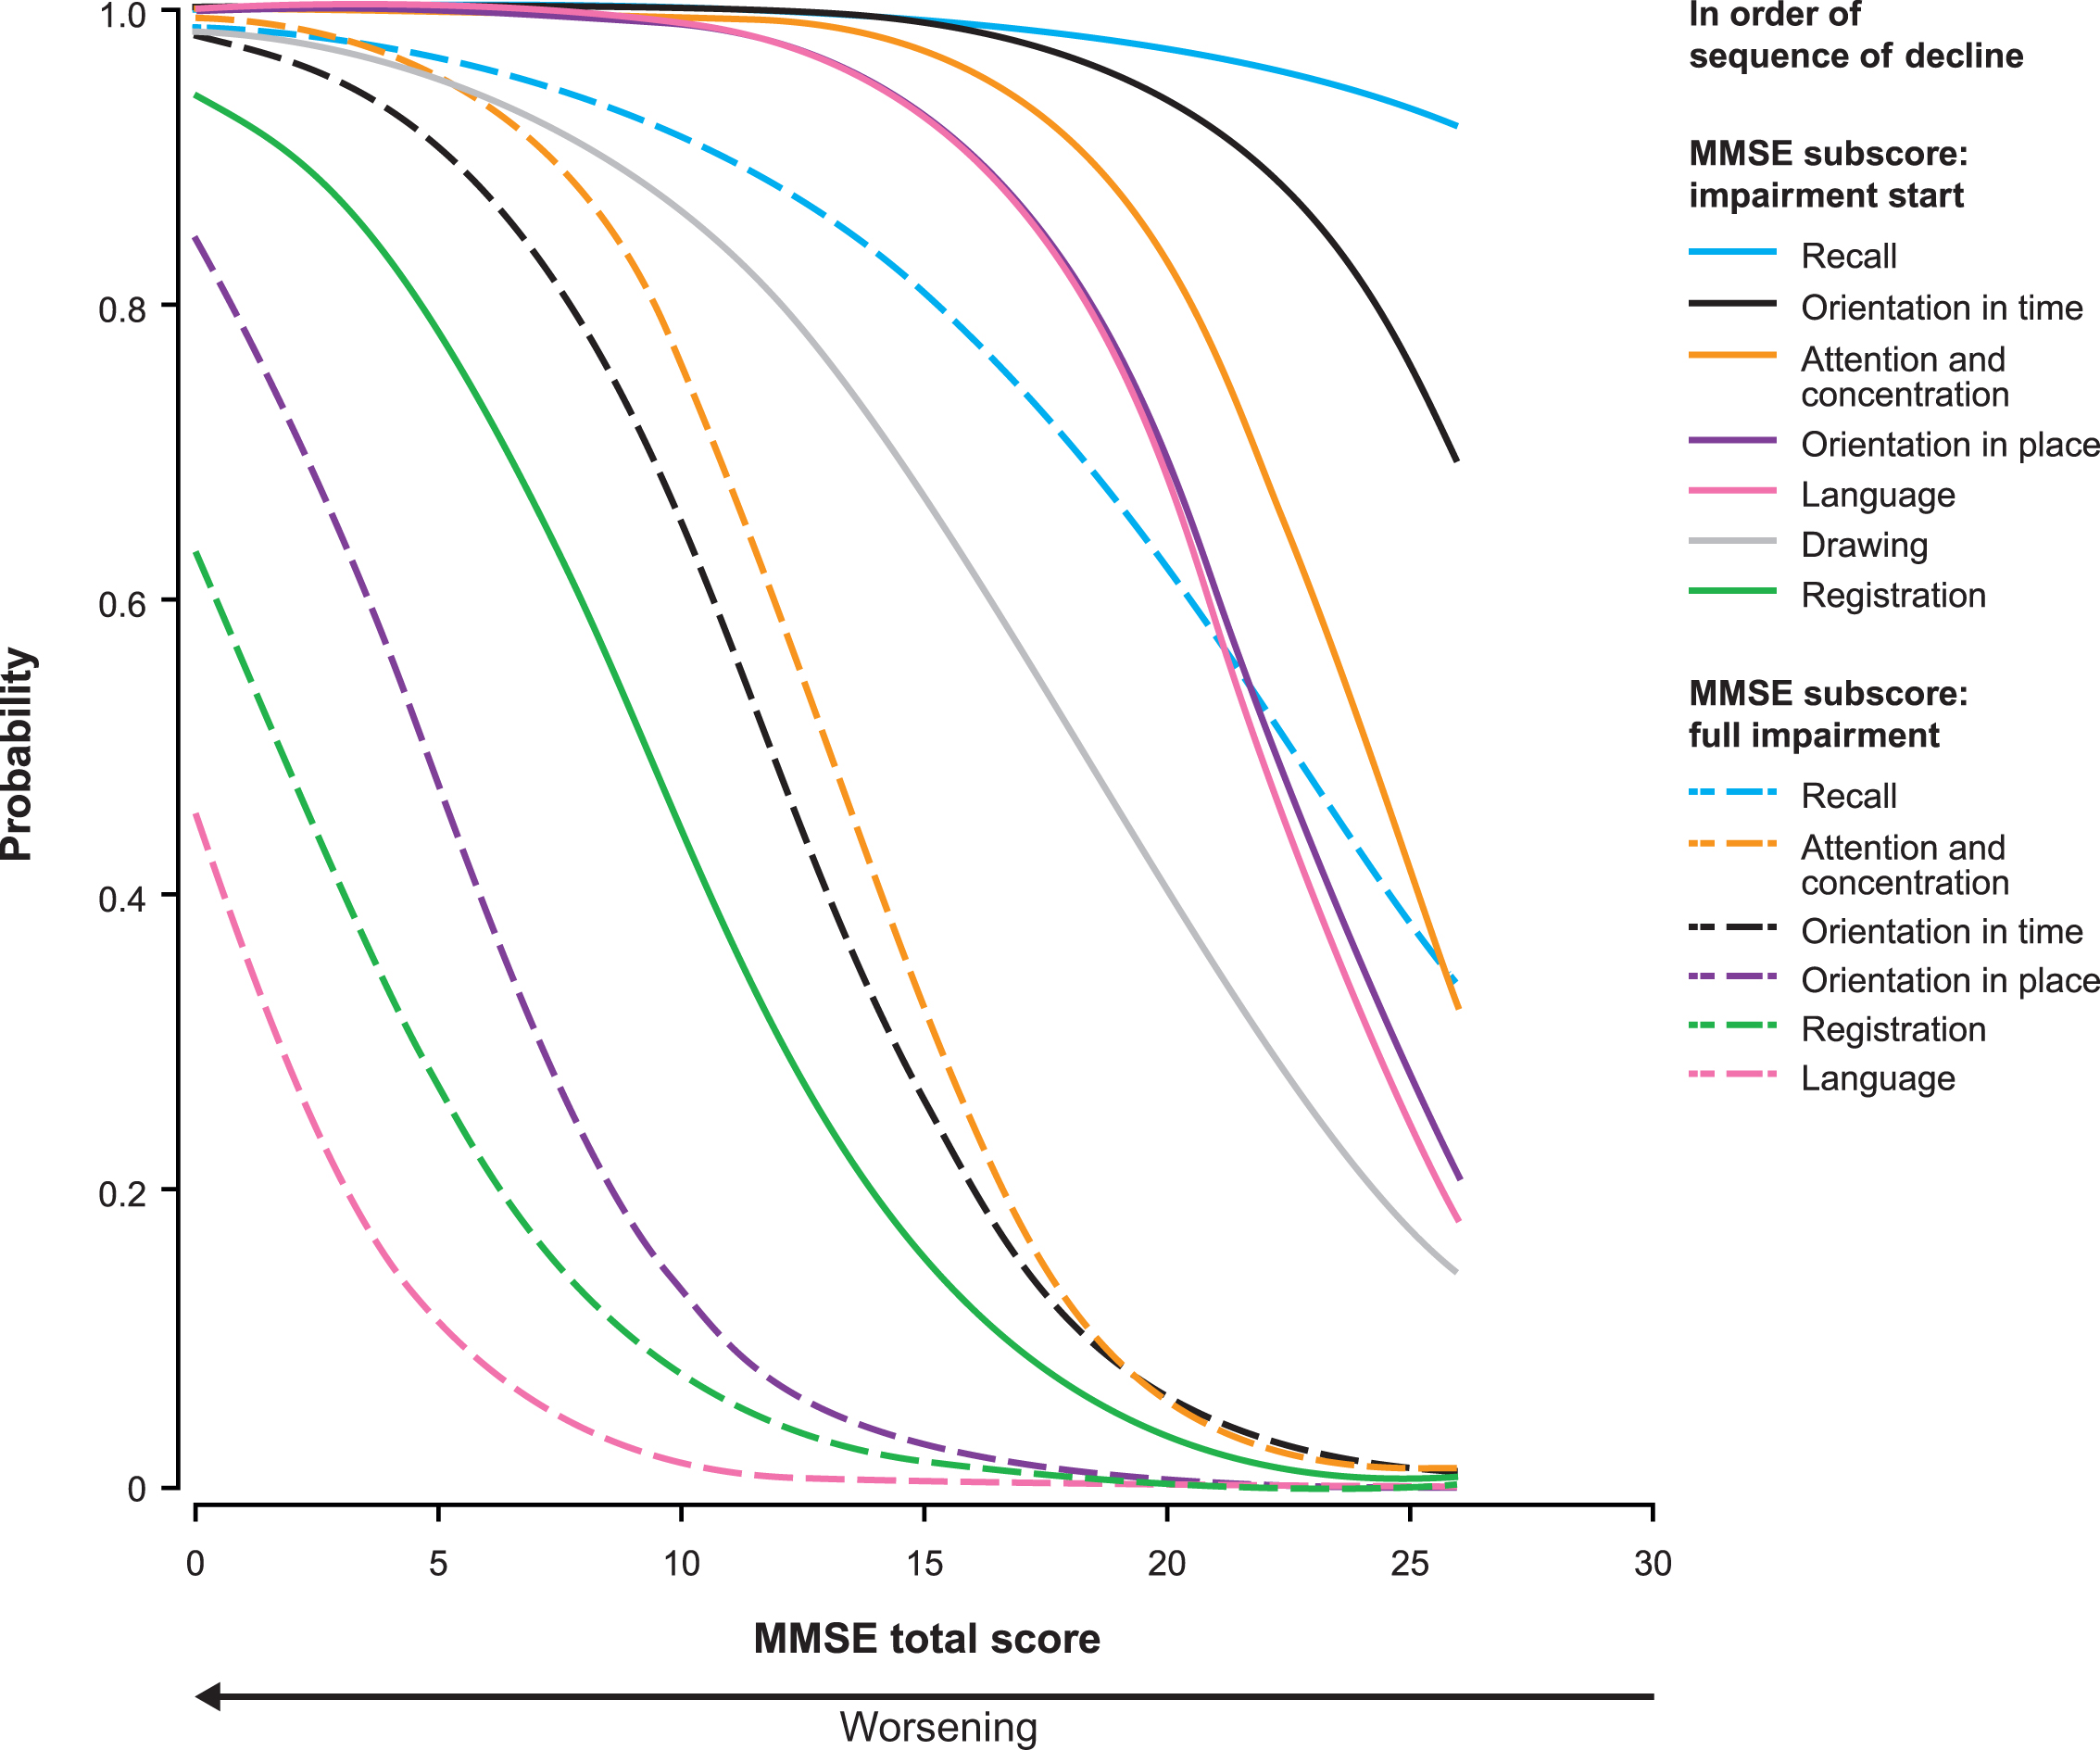 Proportional odds estimates of the probability of impairment start (solid line) and full impairment (dashed line) for each MMSE subscore as a function of the MMSE total score (n = 1,495). There is only one curve for the MMSE drawing subscore because it has a score range of 0–1. Thus, the line represents both impairment start and full impairment.